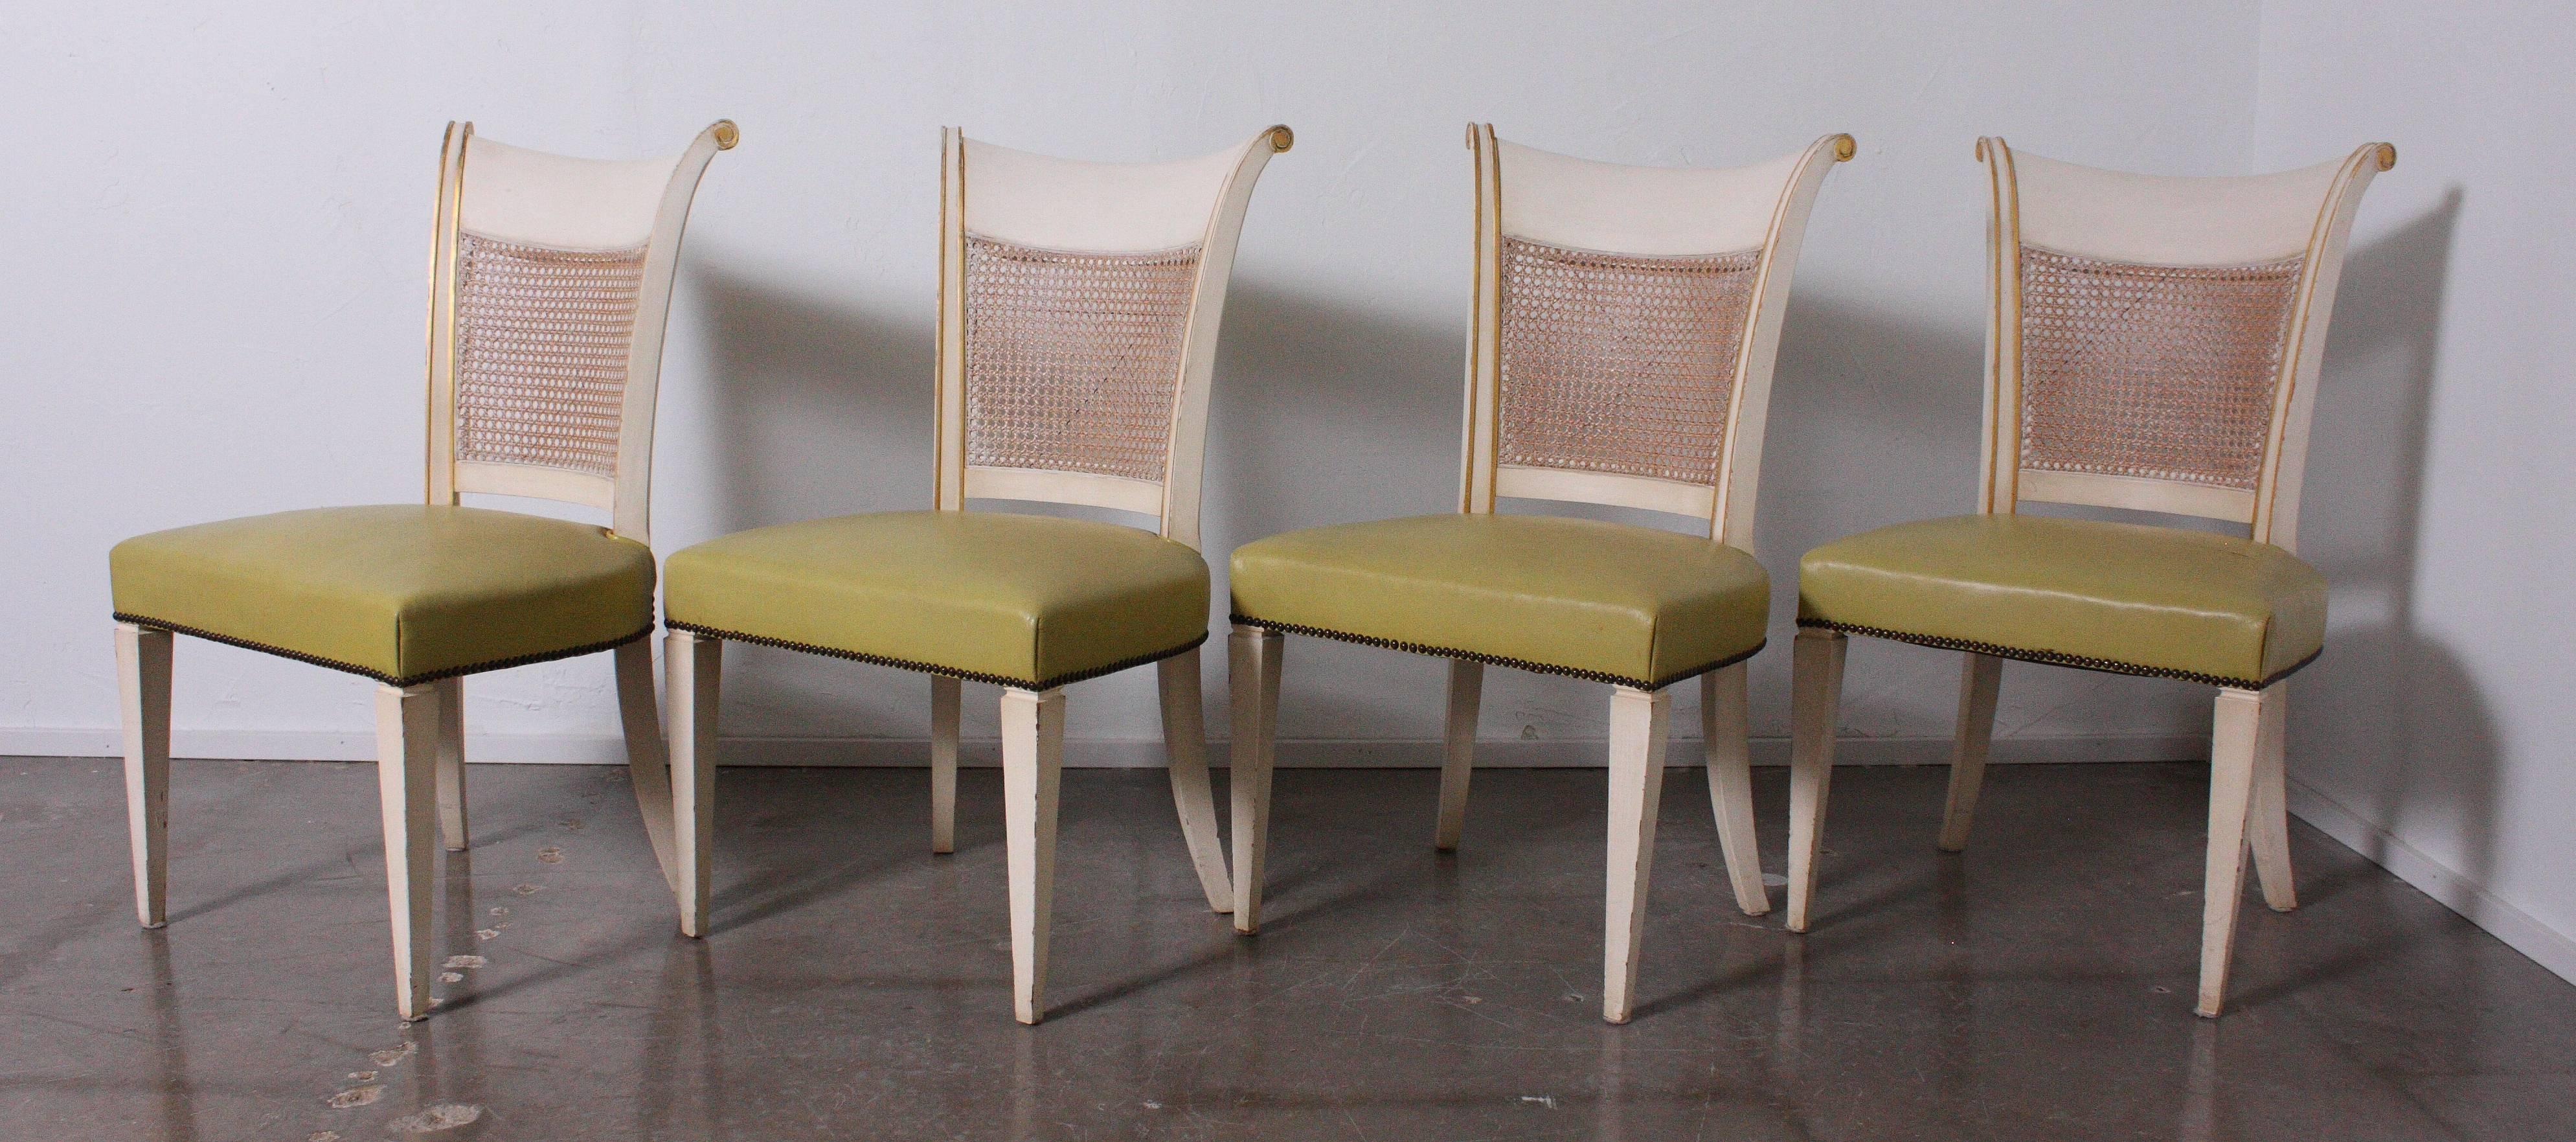 Set of four Hollywood Regency Klismos dining chairs from Baker. Chairs upholstered in original leather with cane backs and wonderful gold detailing.